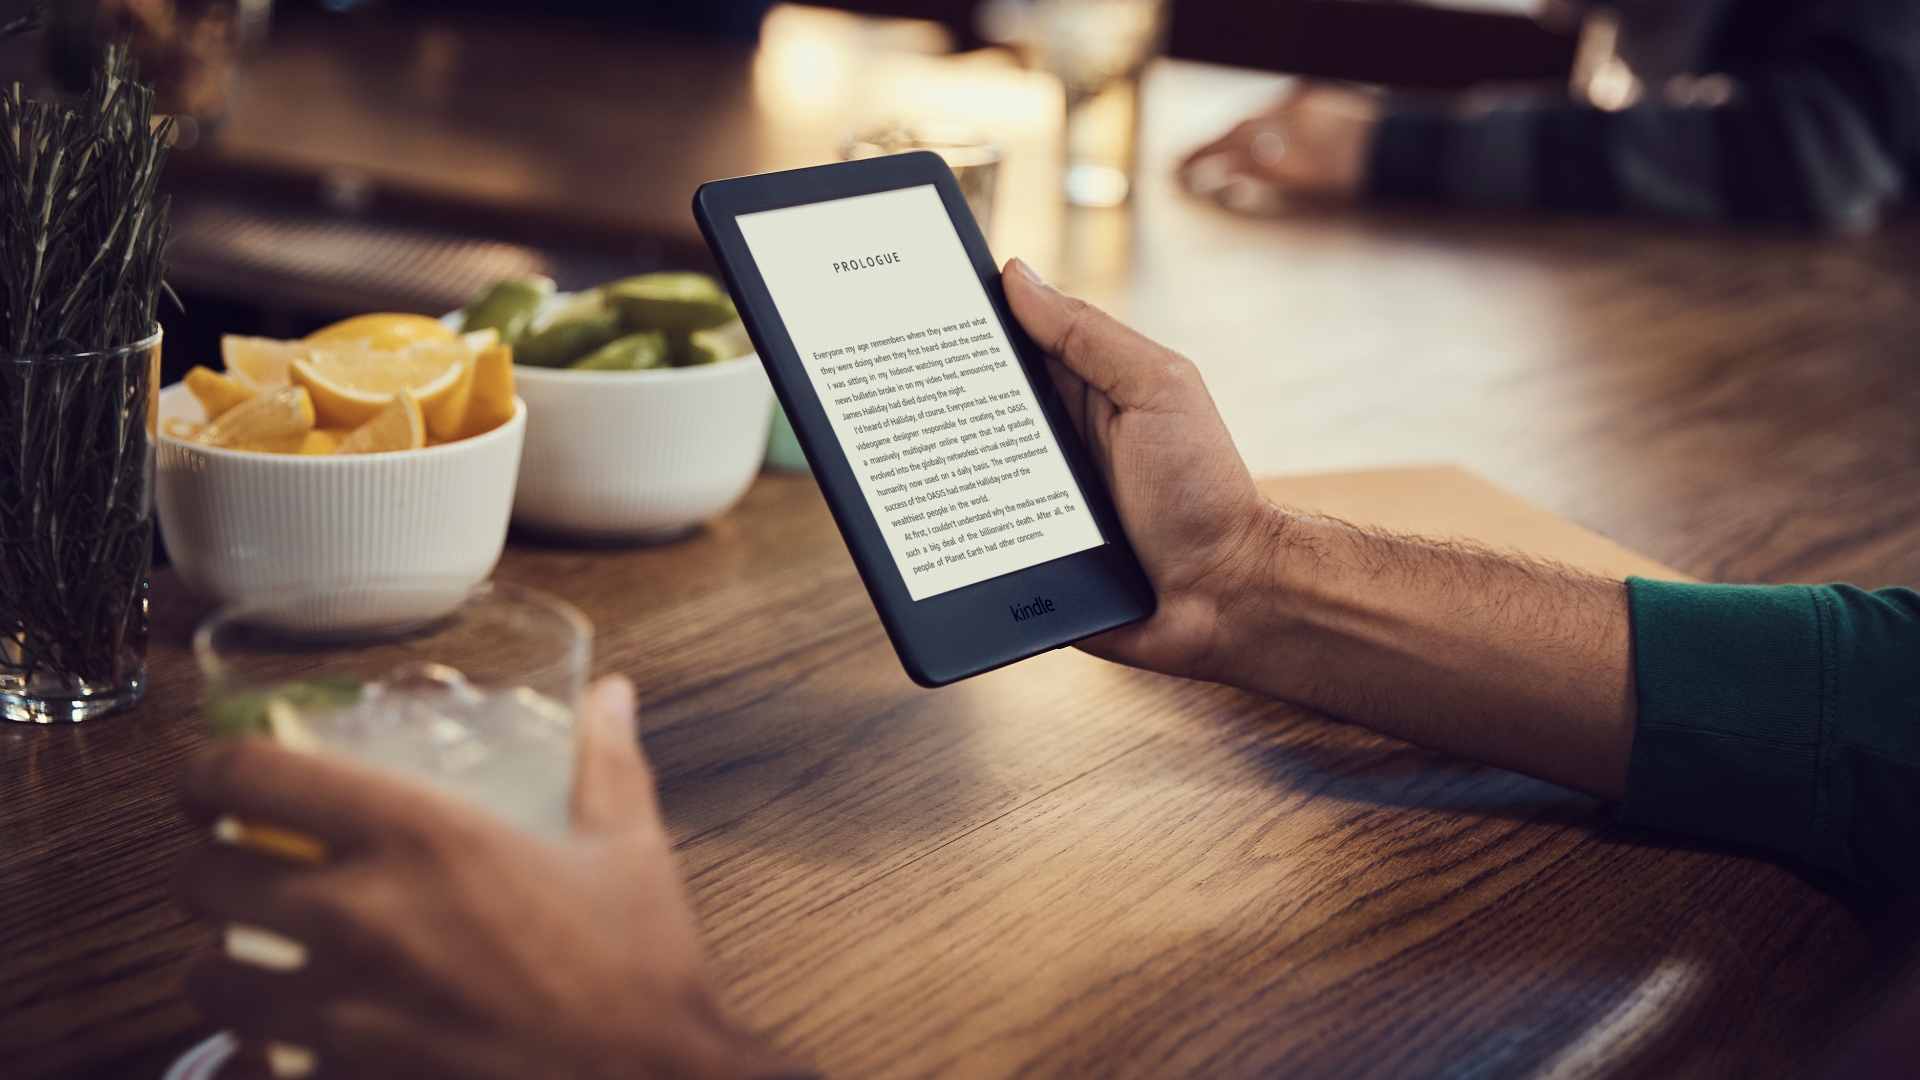 Get two months FREE Kindle Unlimited when you sign up for June